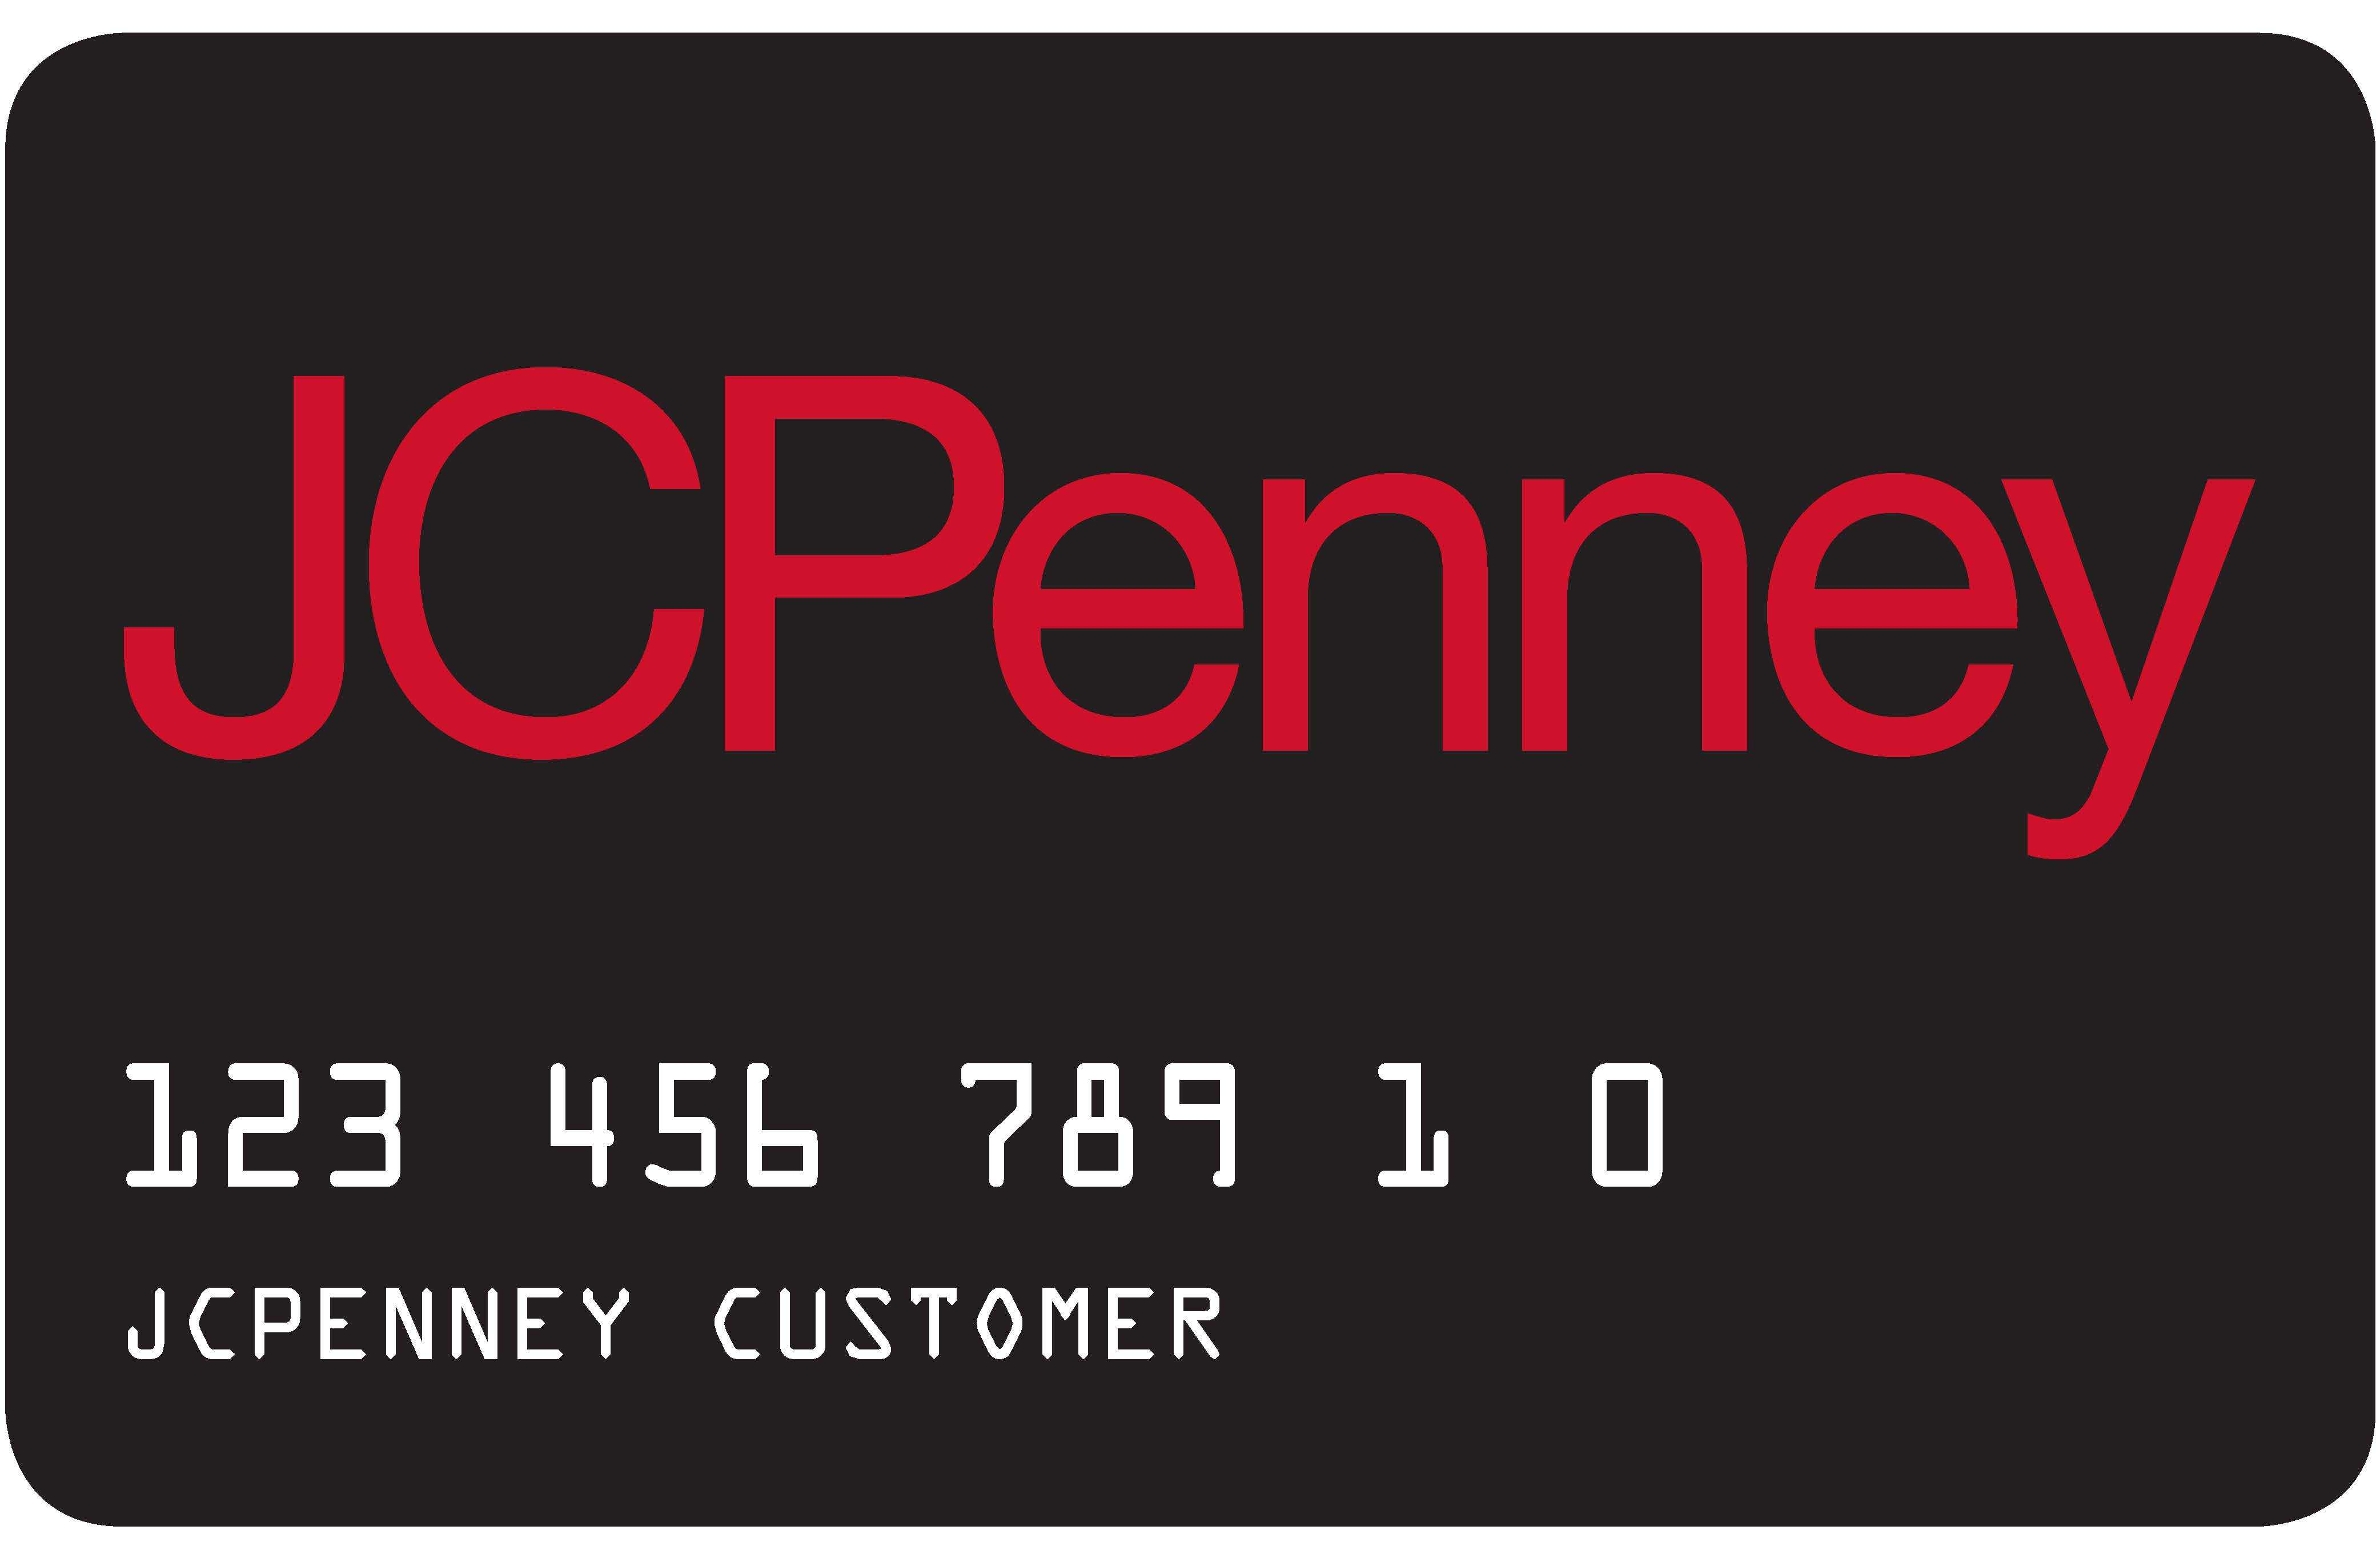 Jcpenney Credit Card Login